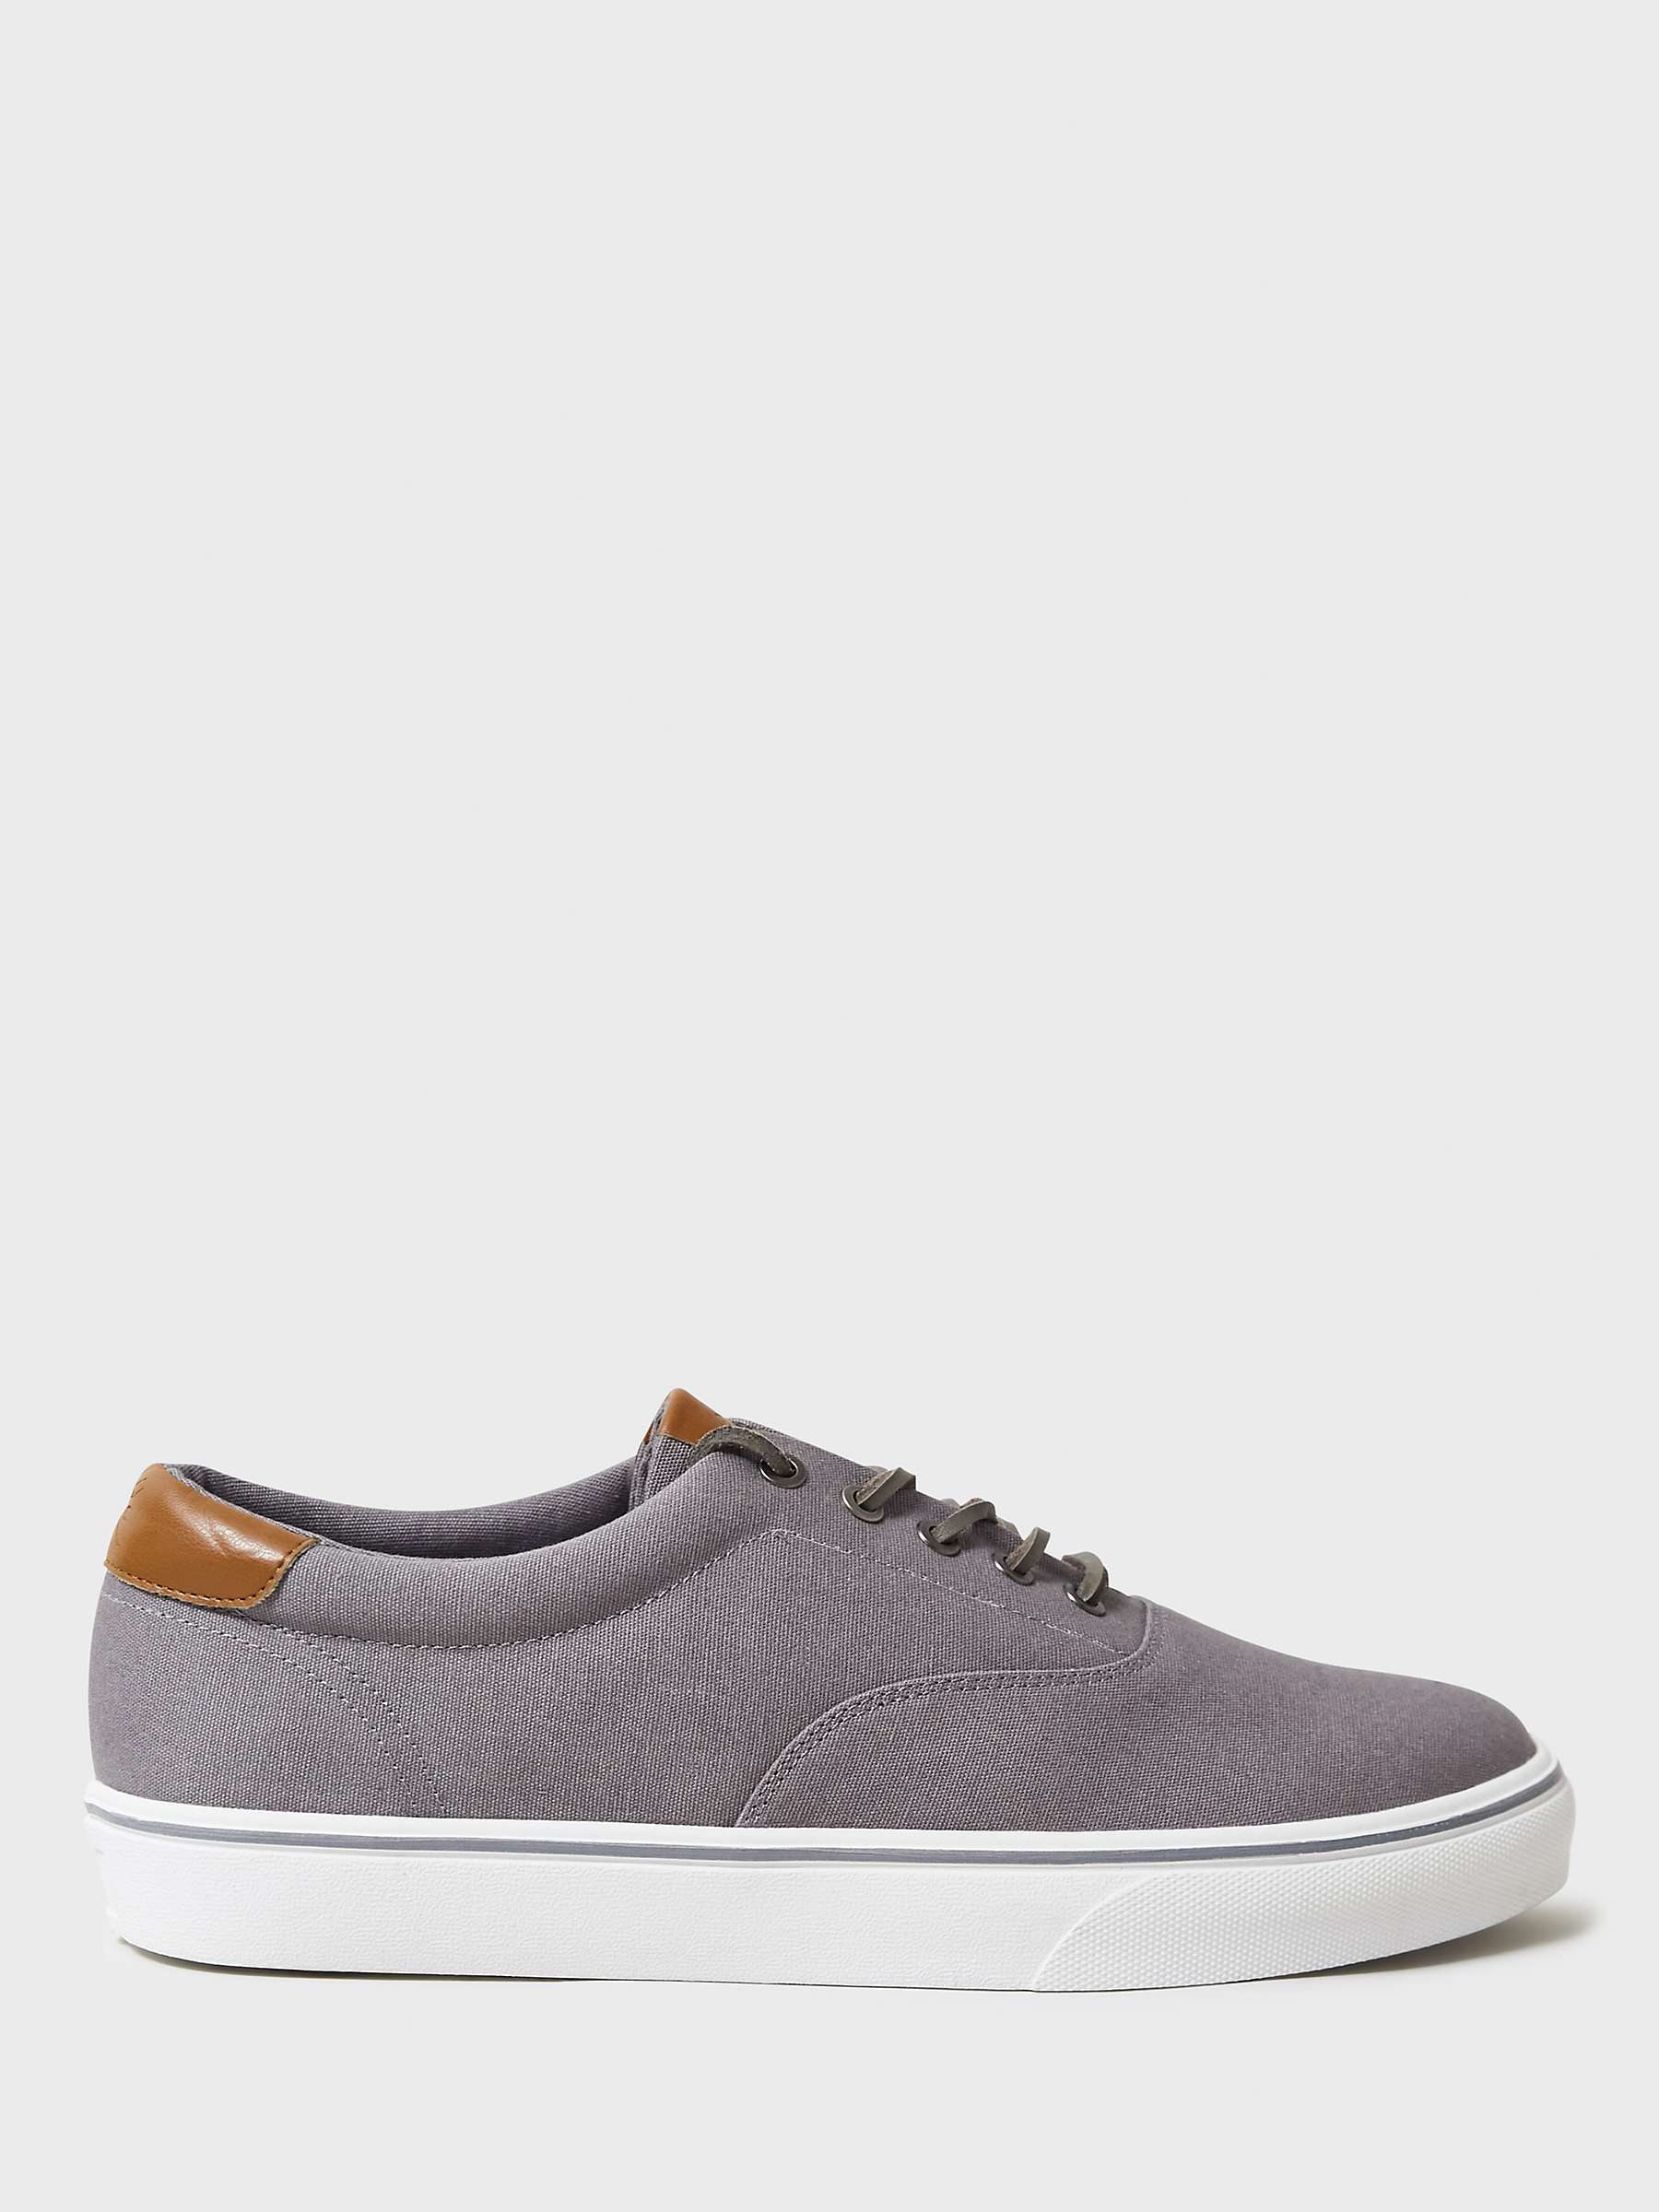 Buy Crew Clothing Oxford Canvas Trainers Online at johnlewis.com